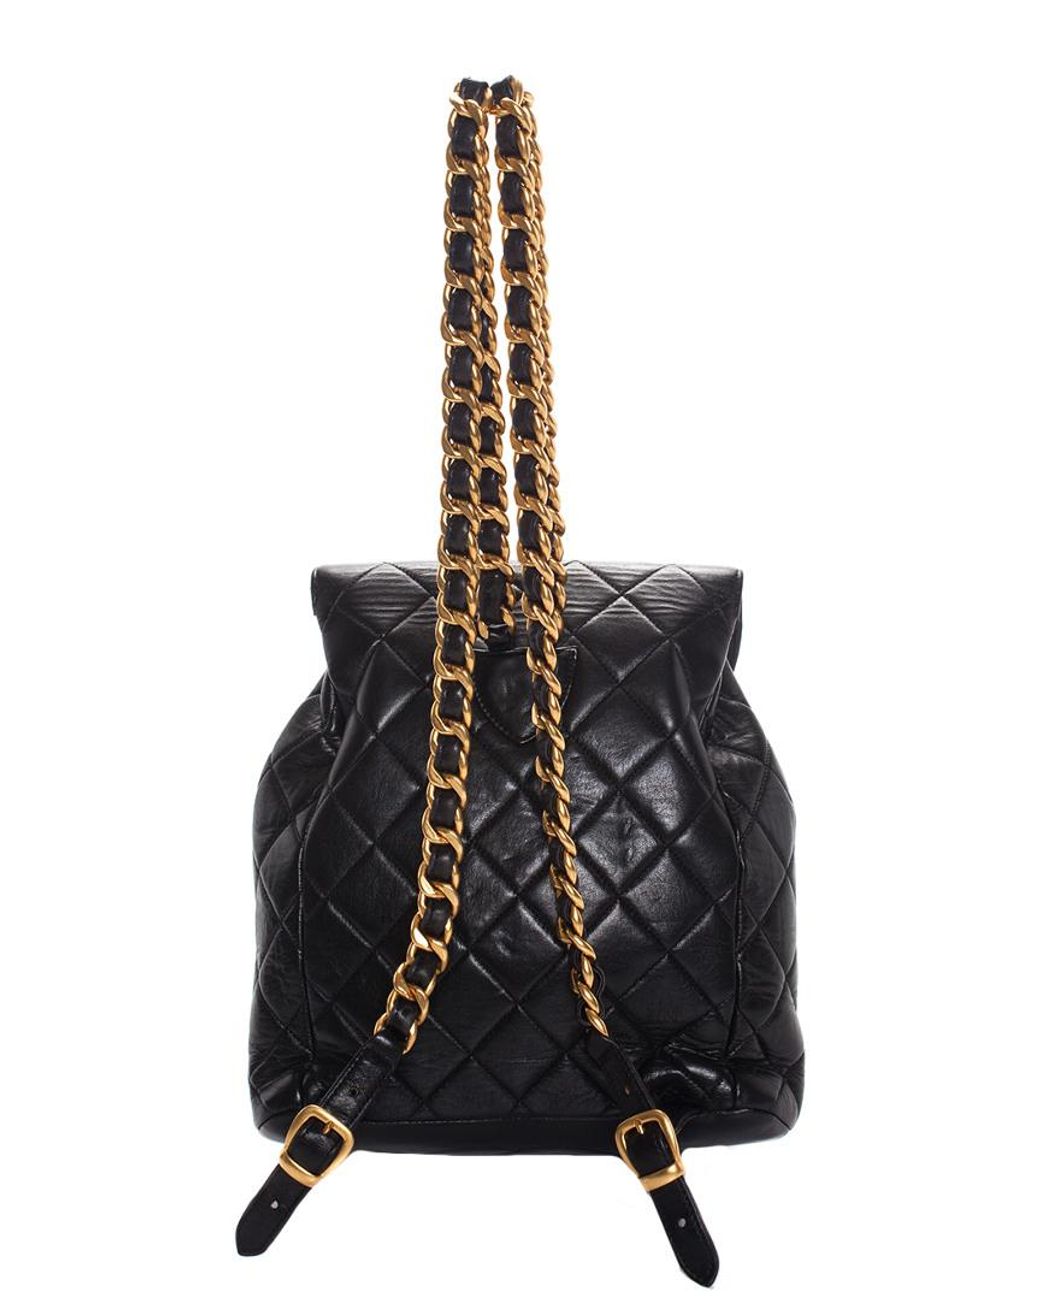 Chanel Black Lambskin Leather Quilted Backpack, Never Carried | Lyst